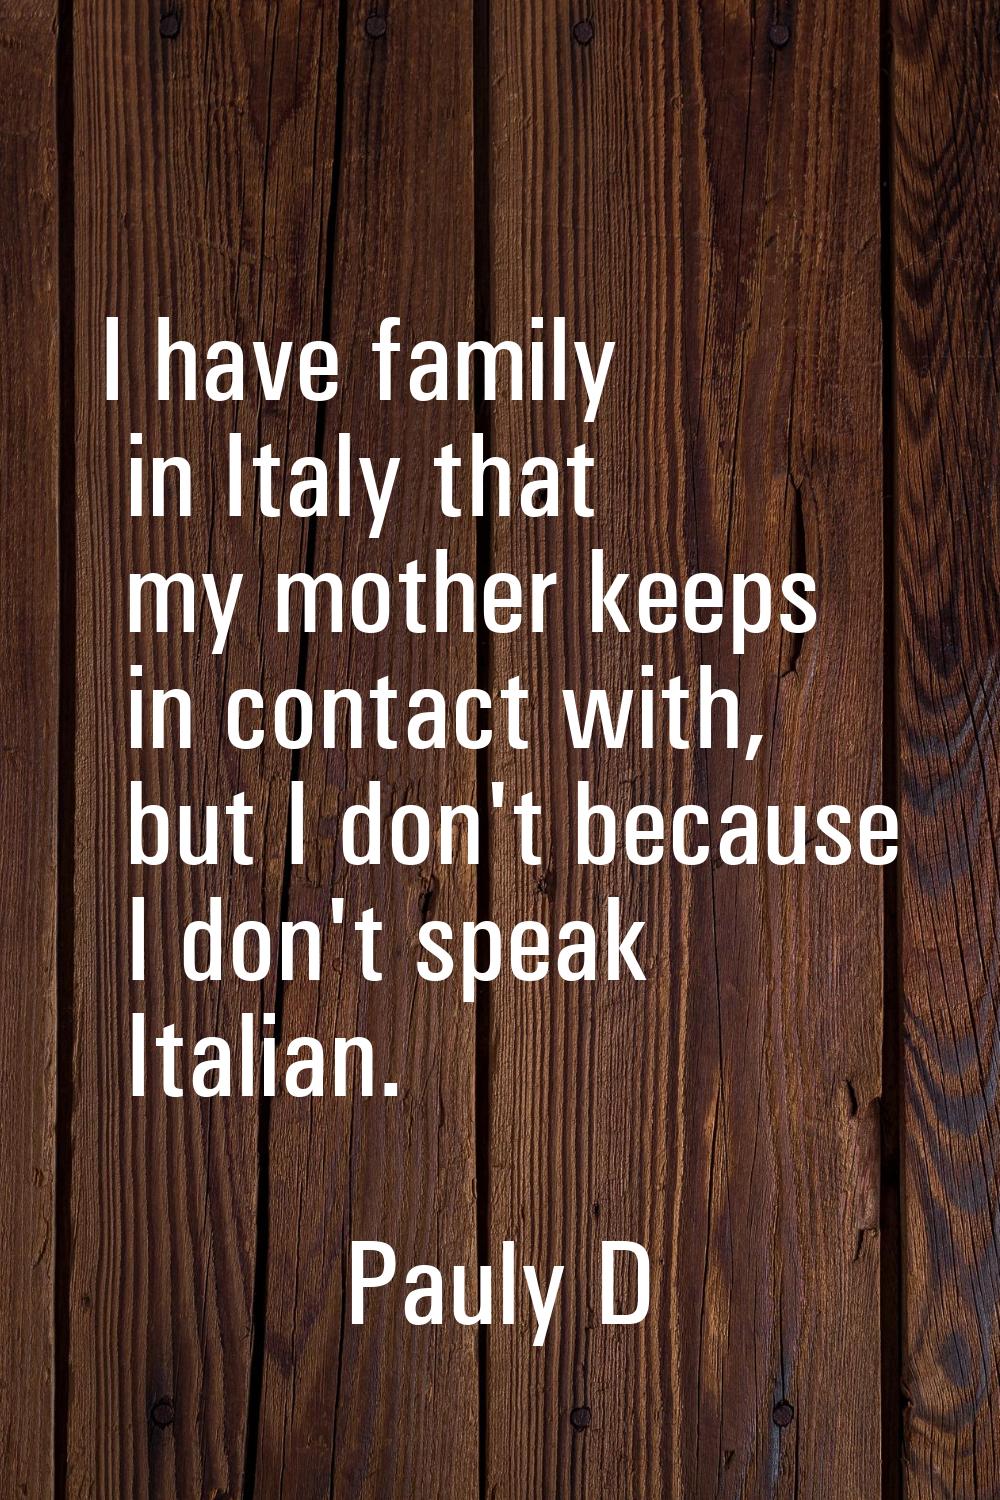 I have family in Italy that my mother keeps in contact with, but I don't because I don't speak Ital